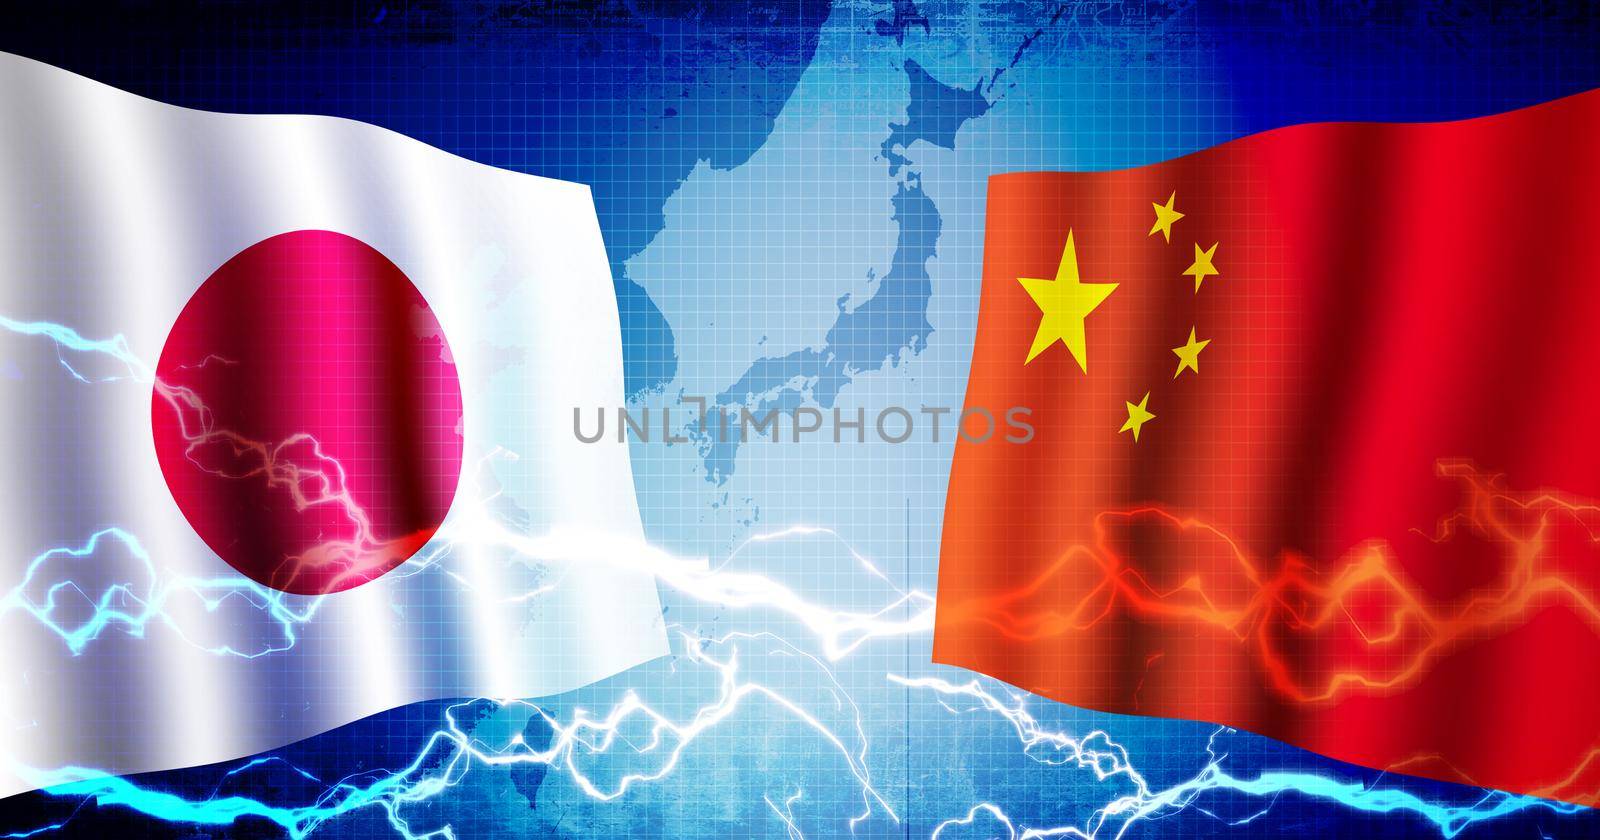 Political confrontation between Japan and China / web banner background illustration